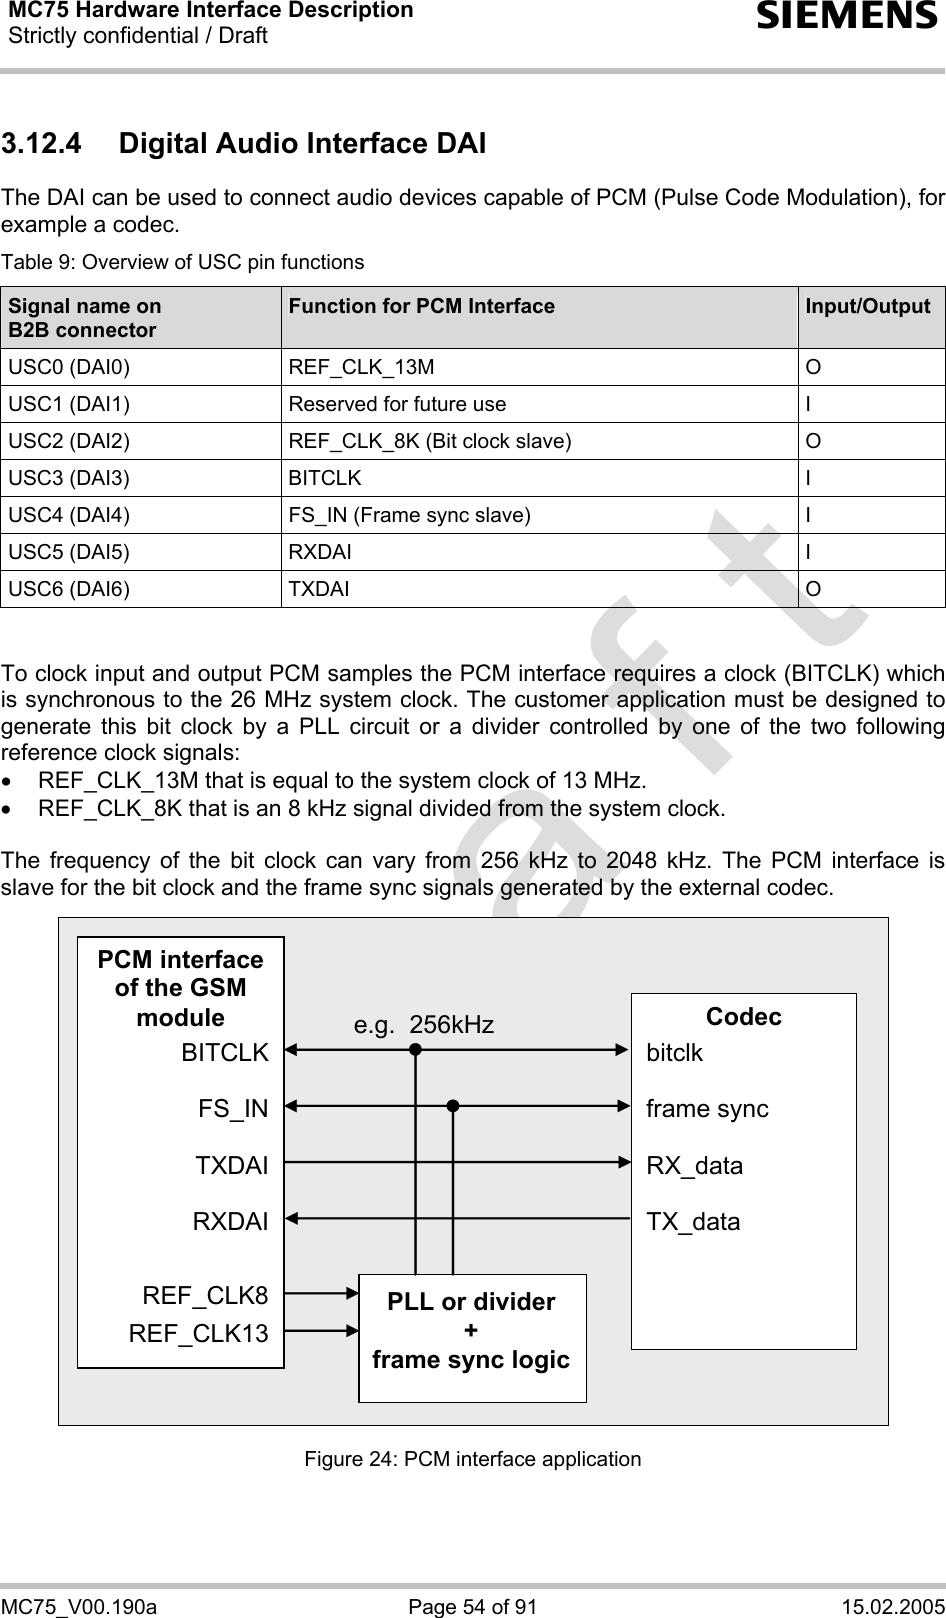 MC75 Hardware Interface Description Strictly confidential / Draft  s MC75_V00.190a  Page 54 of 91  15.02.2005 3.12.4  Digital Audio Interface DAI The DAI can be used to connect audio devices capable of PCM (Pulse Code Modulation), for example a codec. Table 9: Overview of USC pin functions Signal name on  B2B connector Function for PCM Interface  Input/Output USC0 (DAI0)  REF_CLK_13M  O USC1 (DAI1)  Reserved for future use  I USC2 (DAI2)  REF_CLK_8K (Bit clock slave)  O USC3 (DAI3)  BITCLK  I USC4 (DAI4)  FS_IN (Frame sync slave)  I USC5 (DAI5)  RXDAI  I USC6 (DAI6)  TXDAI  O   To clock input and output PCM samples the PCM interface requires a clock (BITCLK) which is synchronous to the 26 MHz system clock. The customer application must be designed to generate this bit clock by a PLL circuit or a divider controlled by one of the two following reference clock signals:  •  REF_CLK_13M that is equal to the system clock of 13 MHz.  •  REF_CLK_8K that is an 8 kHz signal divided from the system clock.  The frequency of the bit clock can vary from 256 kHz to 2048 kHz. The PCM interface is slave for the bit clock and the frame sync signals generated by the external codec.    PCM interface of the GSM module BITCLK FS_IN REF_CLK8 TXDAI bitclk RXDAI REF_CLK13 PLL or divider + frame sync logicCodec frame sync RX_data TX_data e.g.  256kHz  Figure 24: PCM interface application  